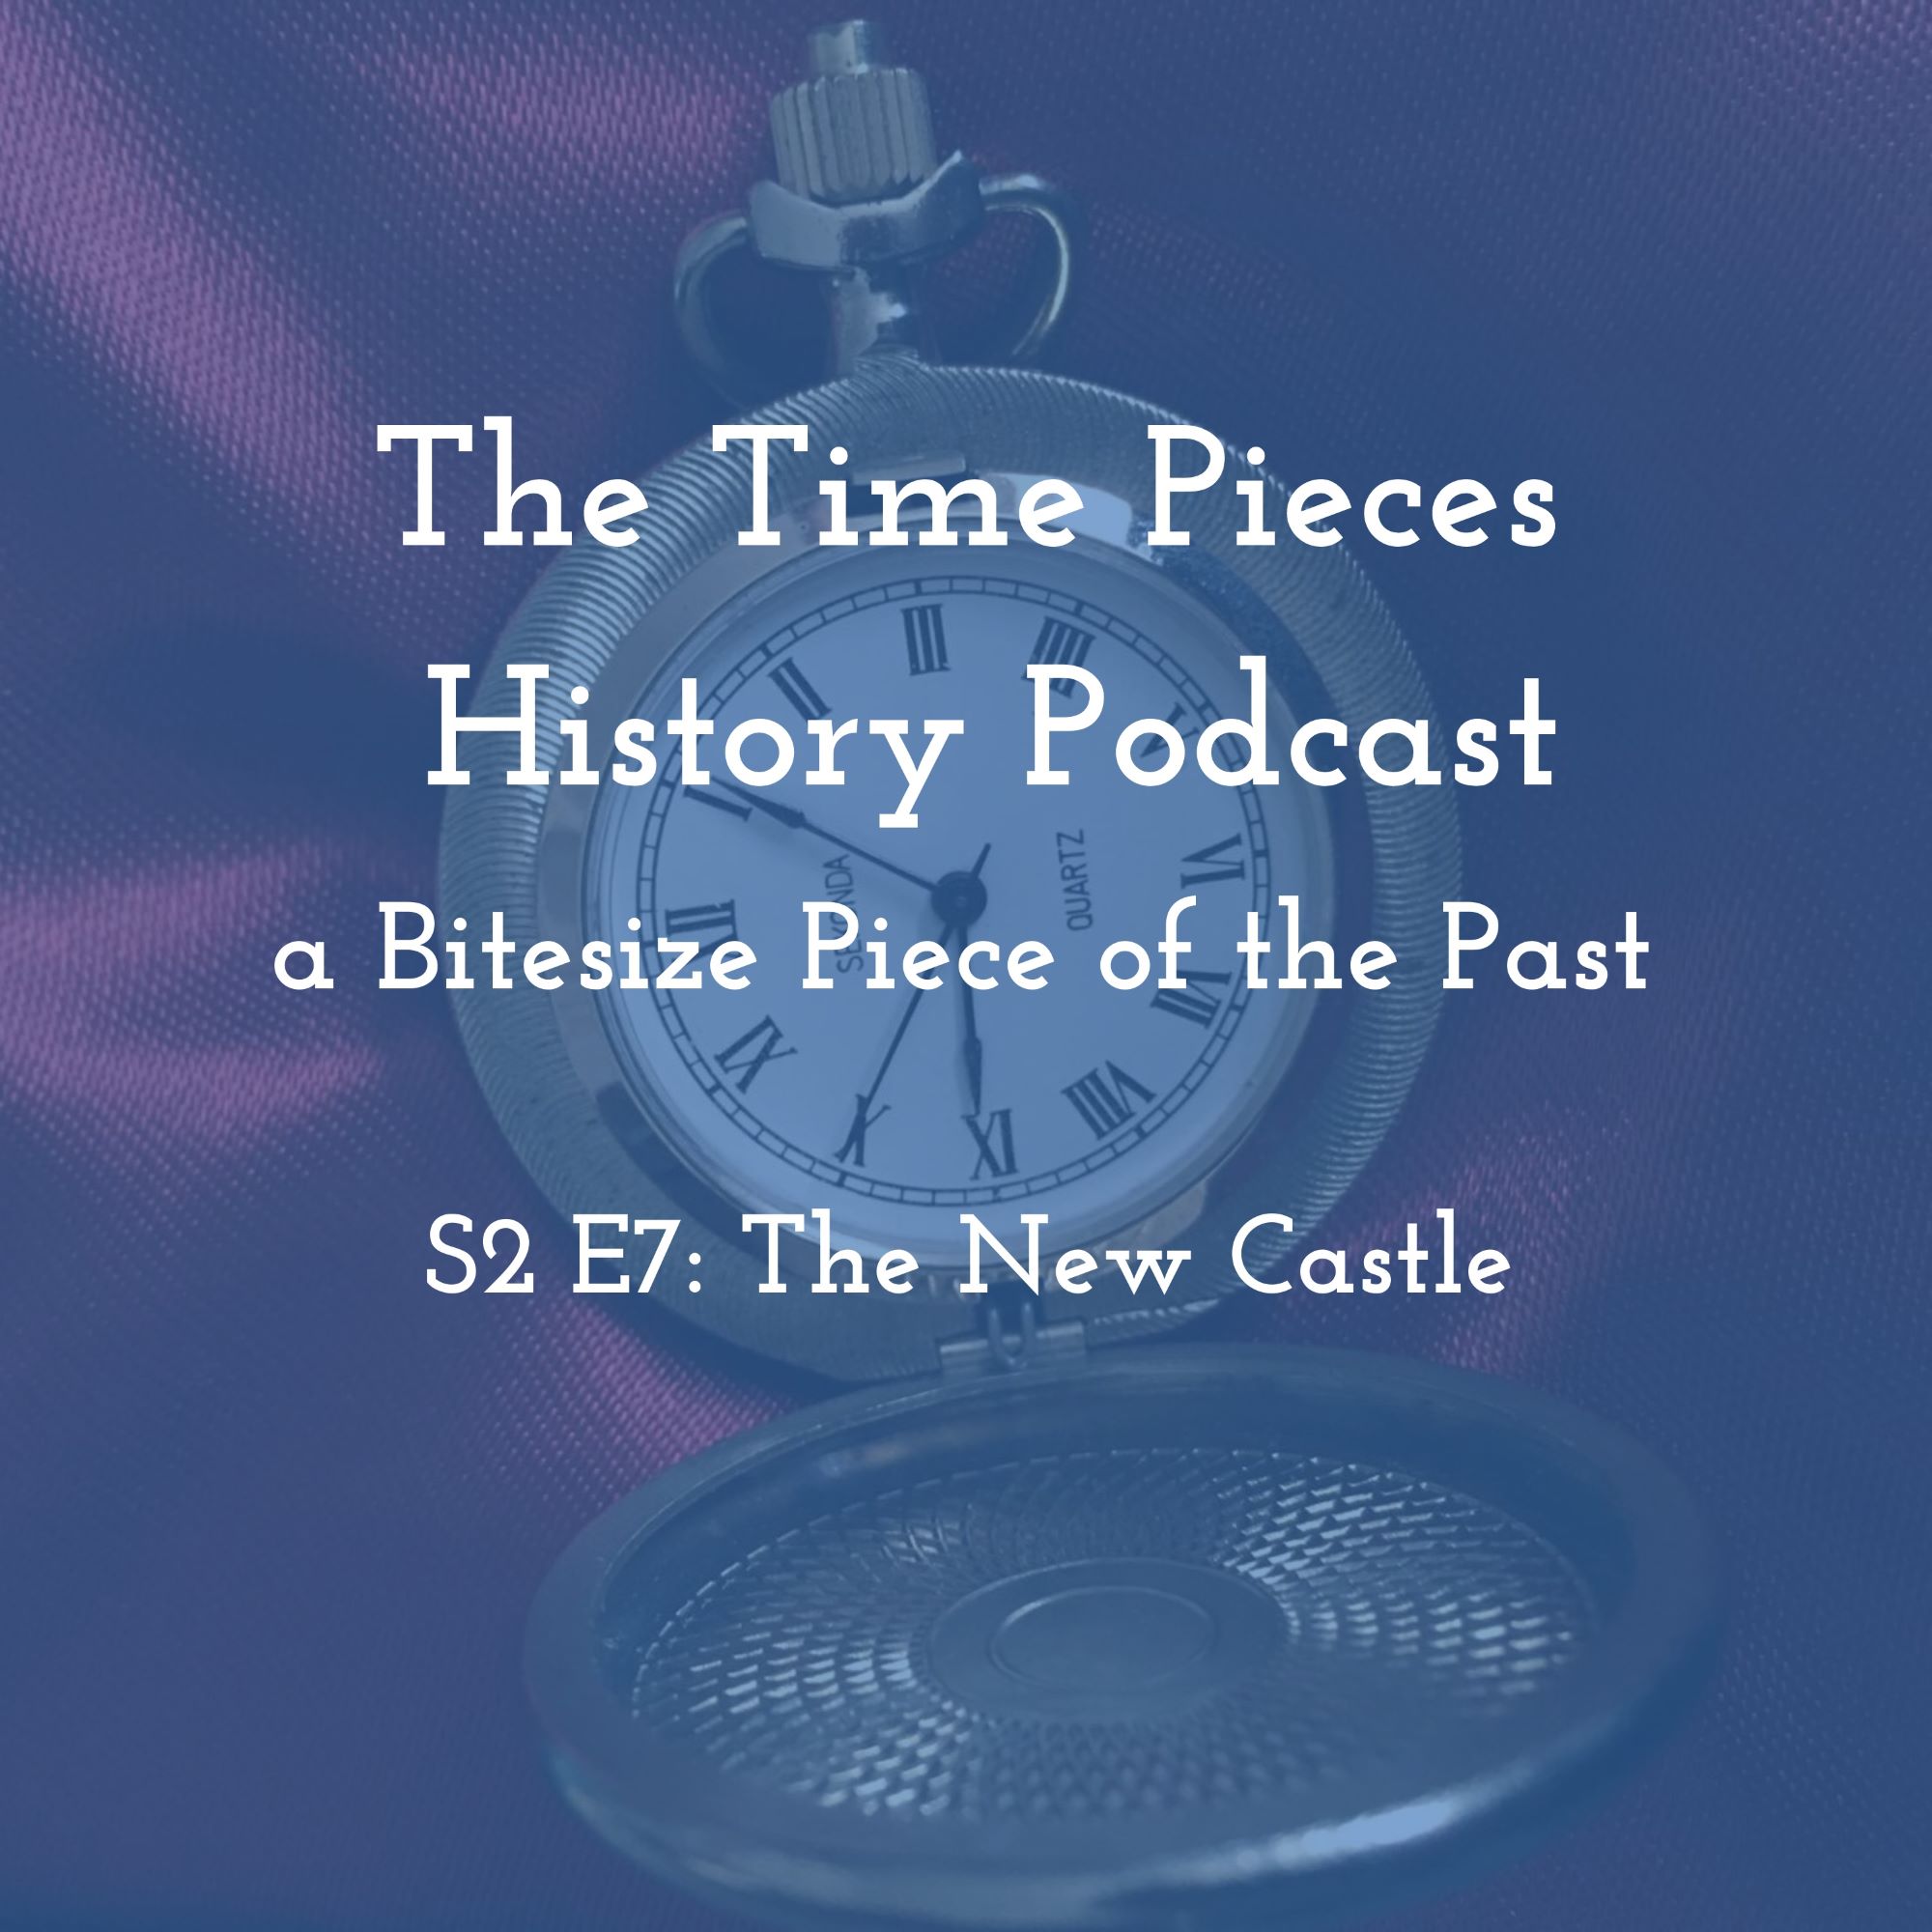 Artwork for podcast Time Pieces History